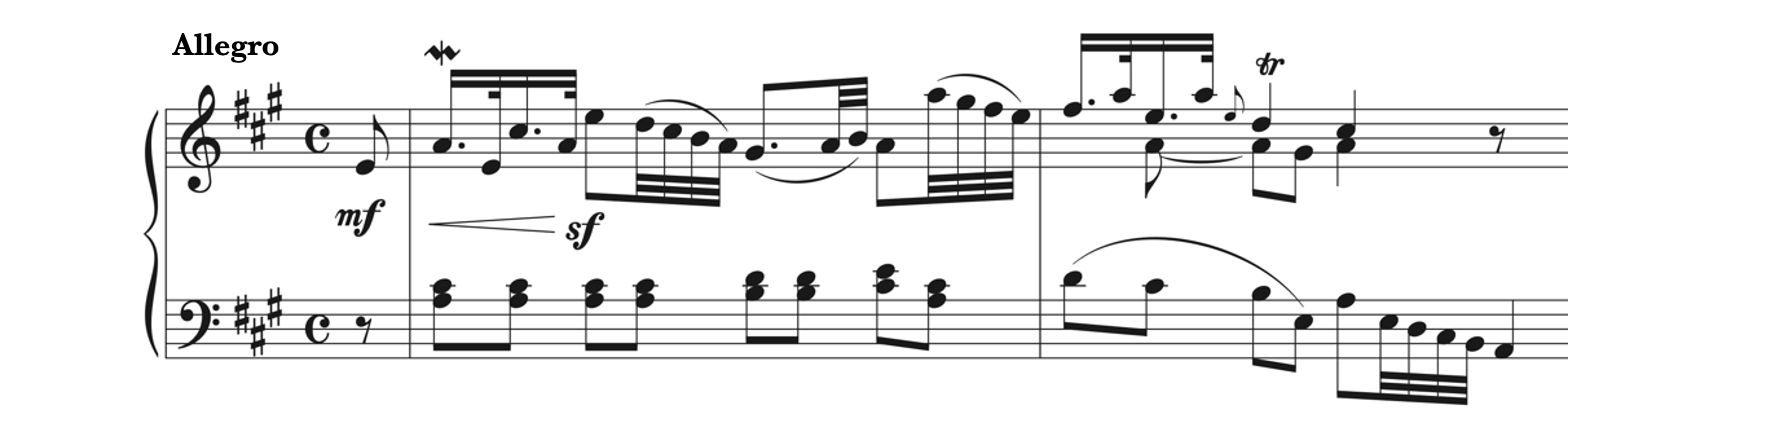 Examples of ornaments from Martinez's Piano Sonata in A Major, first movement - Allegro. This example contains a mordent, an appoggiatura, and a trill.